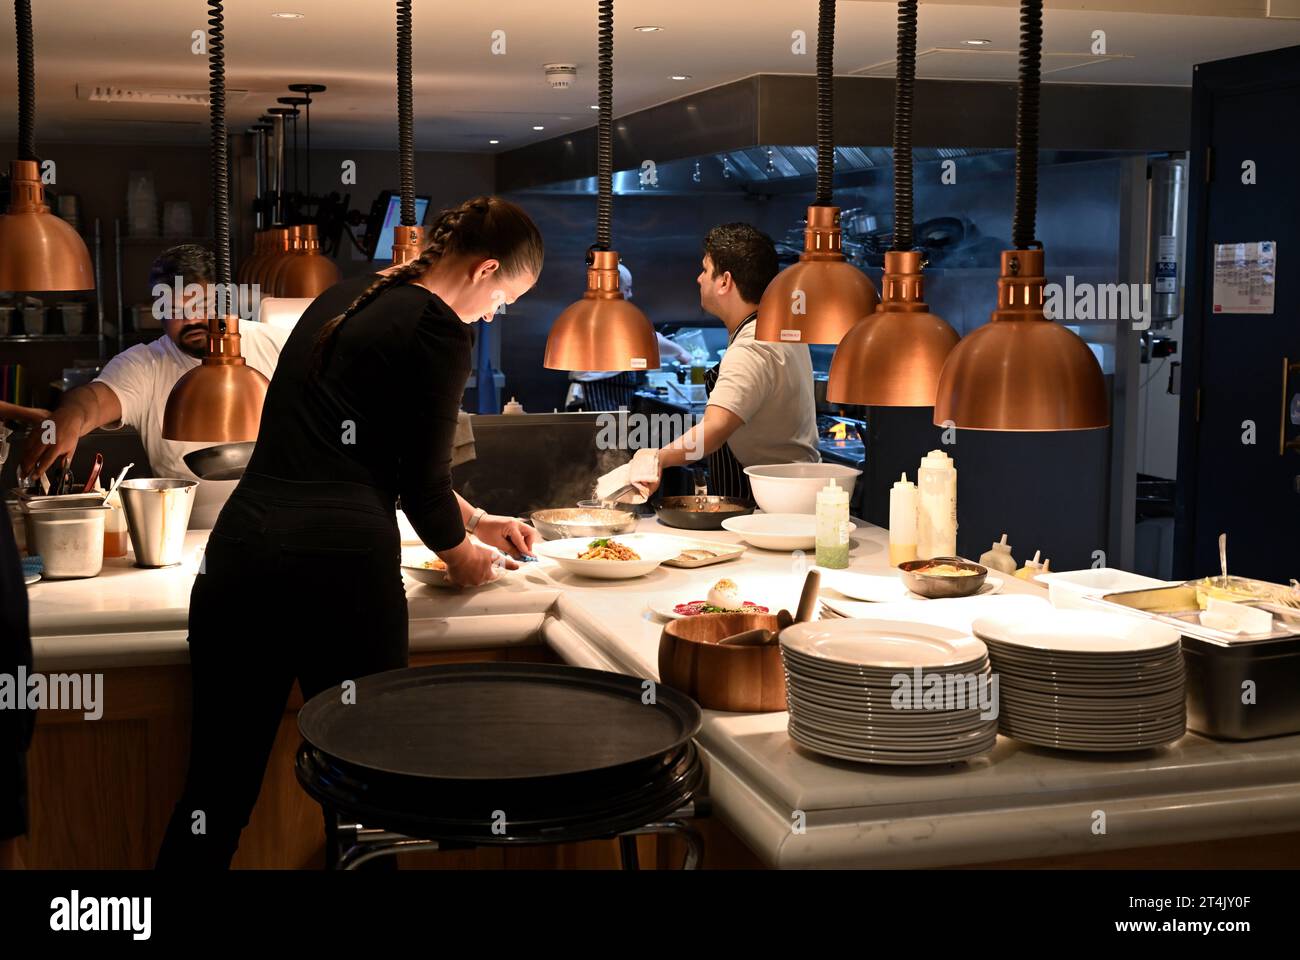 Restaurant chefs serving area with waitress collected food which is ready, Gusto Italian, Oxford, UK Stock Photo